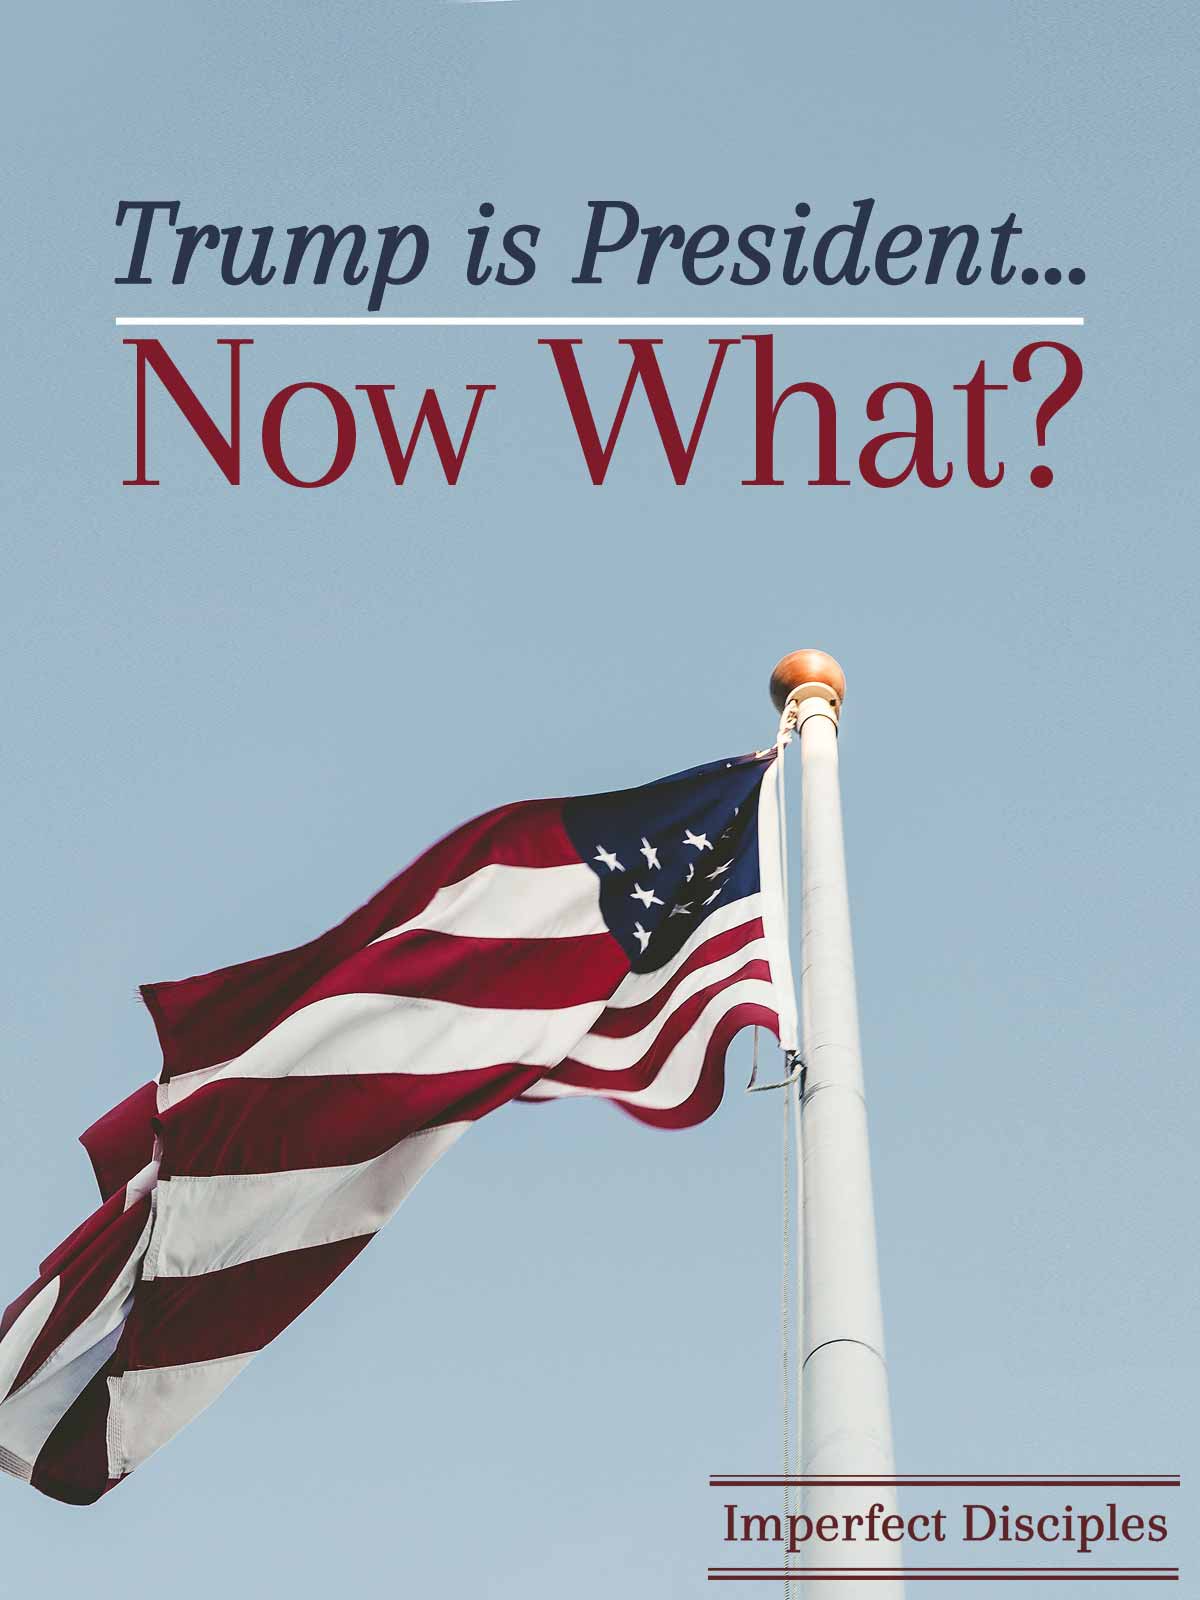 Trump is President. Now What?